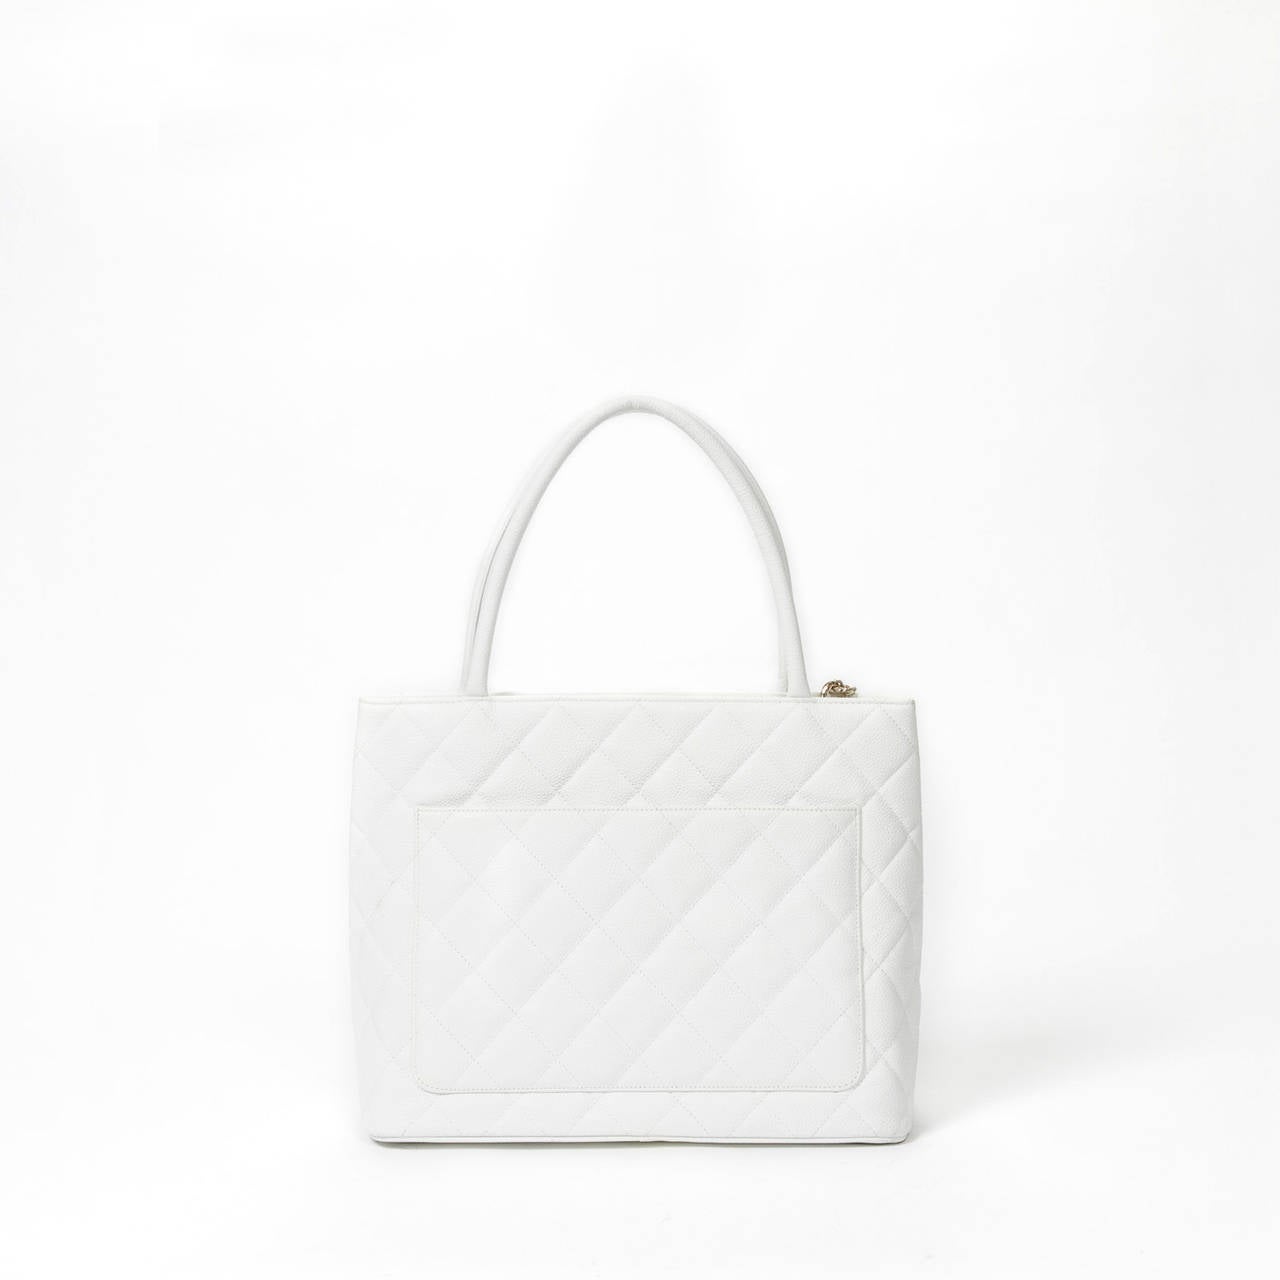 Chanel Médaillon White Grained Leather For Sale 1